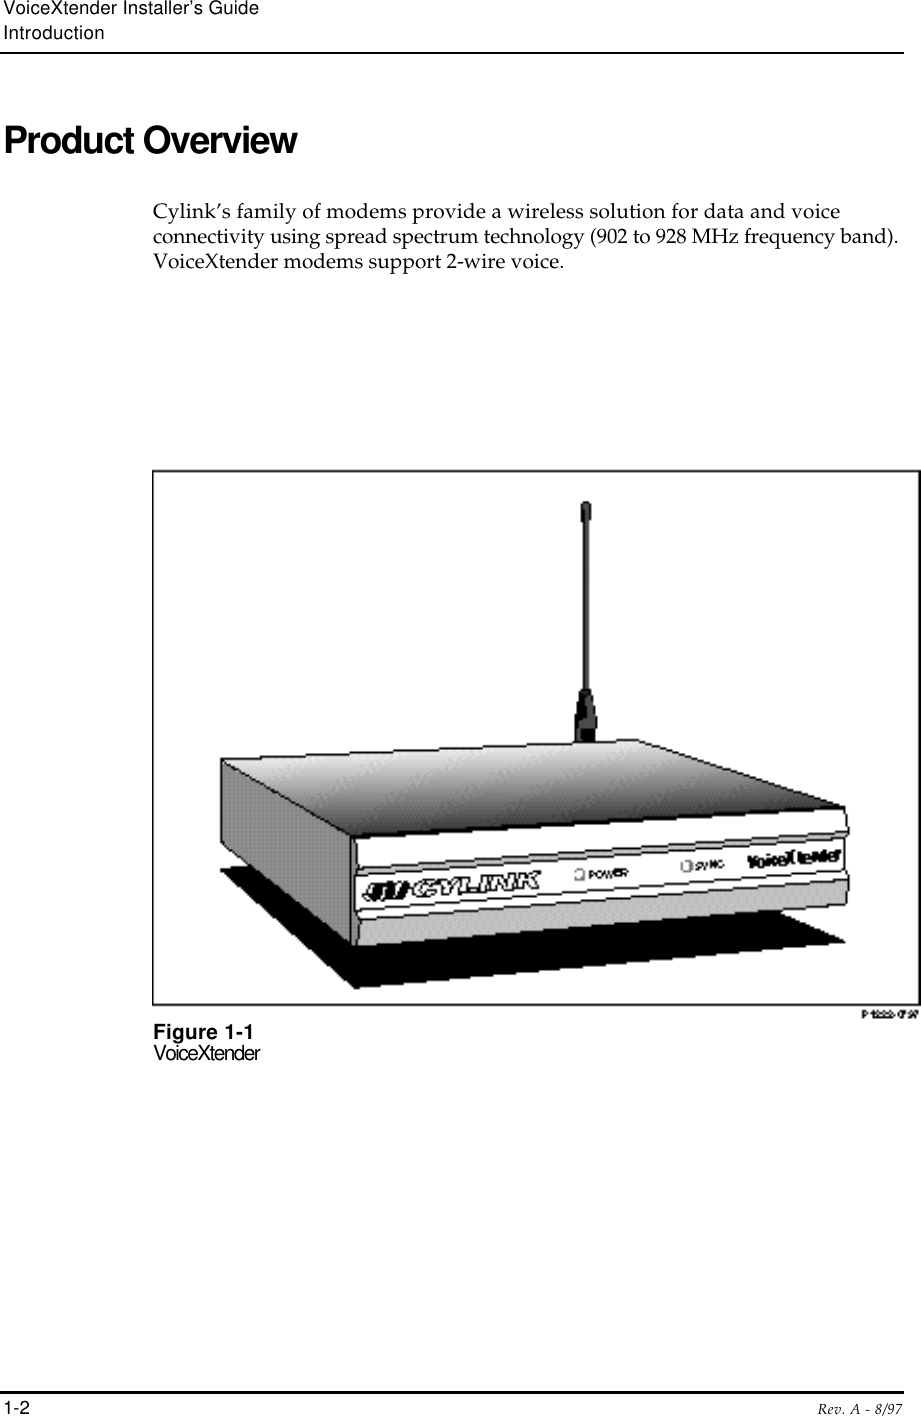 VoiceXtender Installer’s GuideIntroduction1-2 Rev. A - 8/97Product OverviewCylink’s family of modems provide a wireless solution for data and voiceconnectivity using spread spectrum technology (902 to 928 MHz frequency band).VoiceXtender modems support 2-wire voice.Figure 1-1VoiceXtender